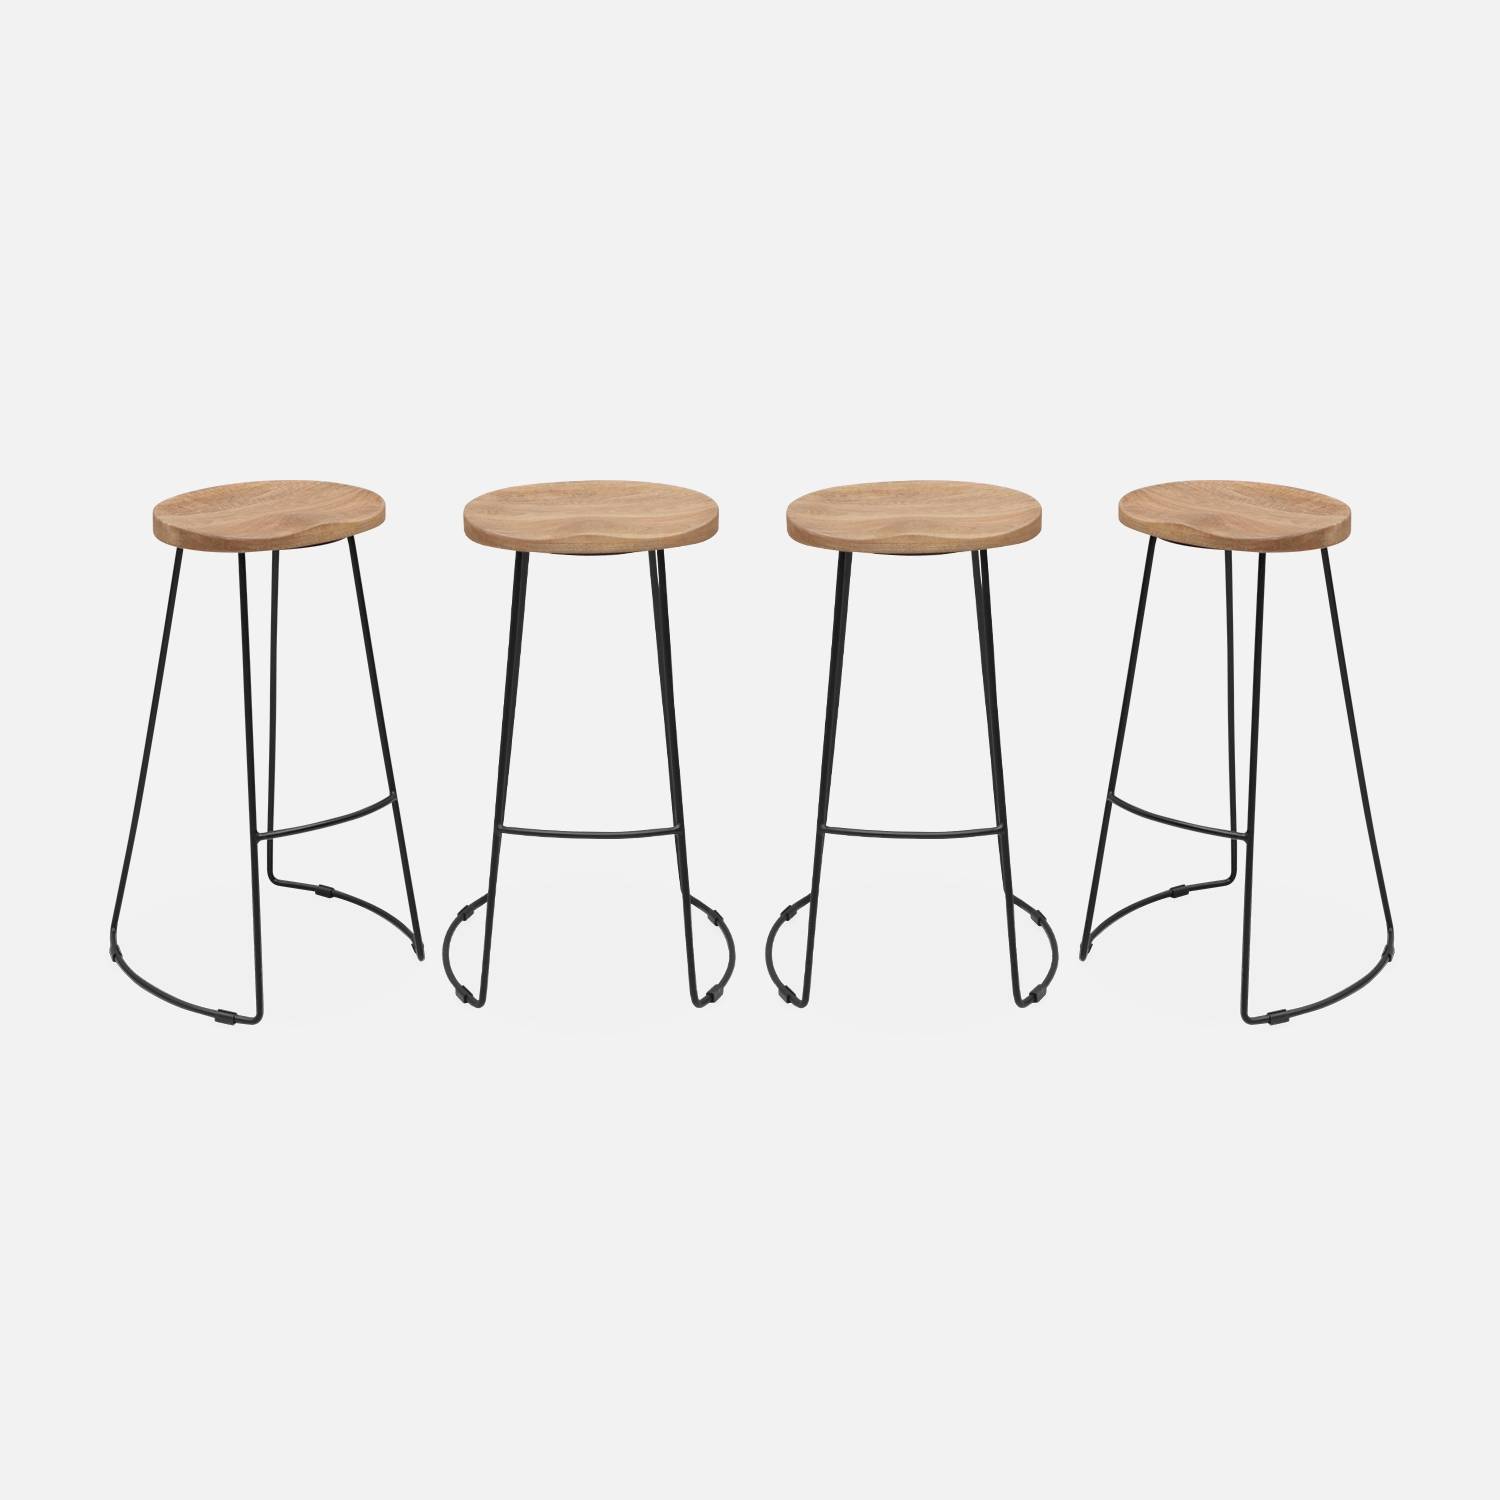 Set of 4 industrial metal and wooden bar stools, 47x40x75cm, Natural | sweeek